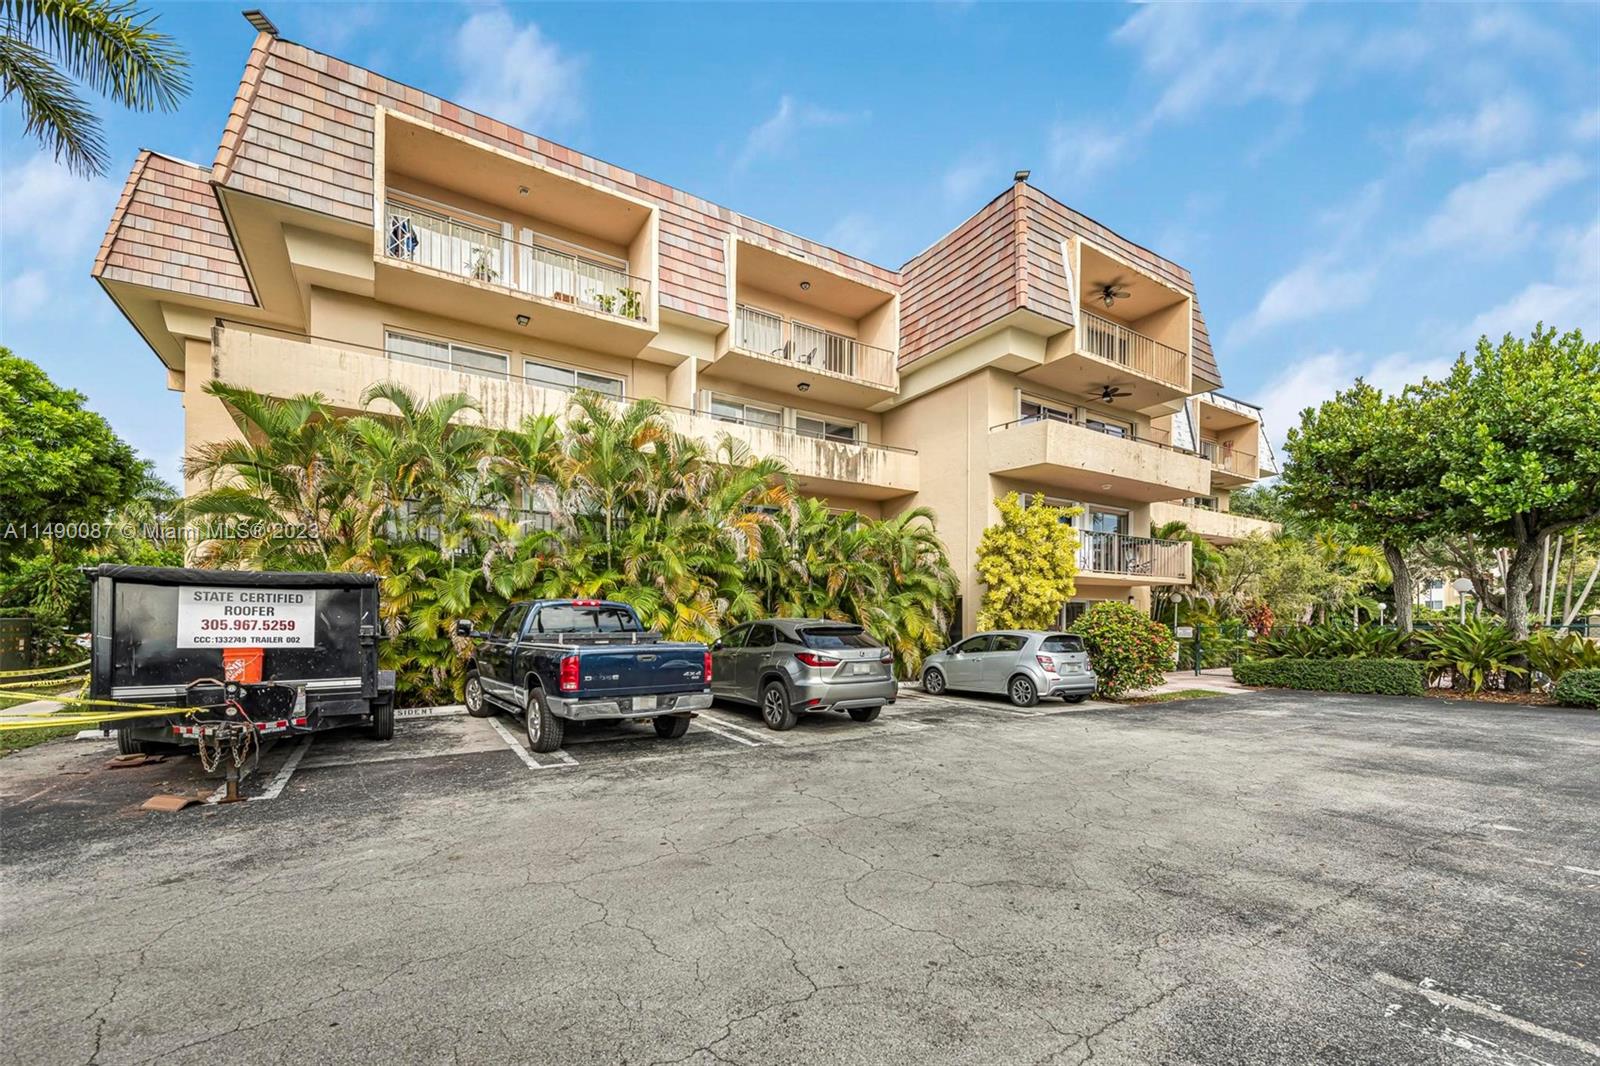 **Bright, Spacious & Well-laid out 1/1 unit on 3rd floor in the Beautiful Village of Kings Creek! Location, location, location! Very central; Only minutes to Dadeland Mall, Metro Rail, fine dining and nearby expressways. Very spacious unit with a huge, open wraparound balcony with open views of green foliage and some. Only 39 units in this boutique bldg. Newer laminate, waterproof vinyl flooring throughout & updated bathroom and kitchen. Plenty of closet space. Features call-in entry, pool and elevator. Laundry room on each floor. 24-hr Security! Buildings amenities include fitness room, second pool, tennis courts, playground, basketball courts, 2 story club house and picnic area.  Tenant occupied until 6/2024, please request your appointment with advanced notice.